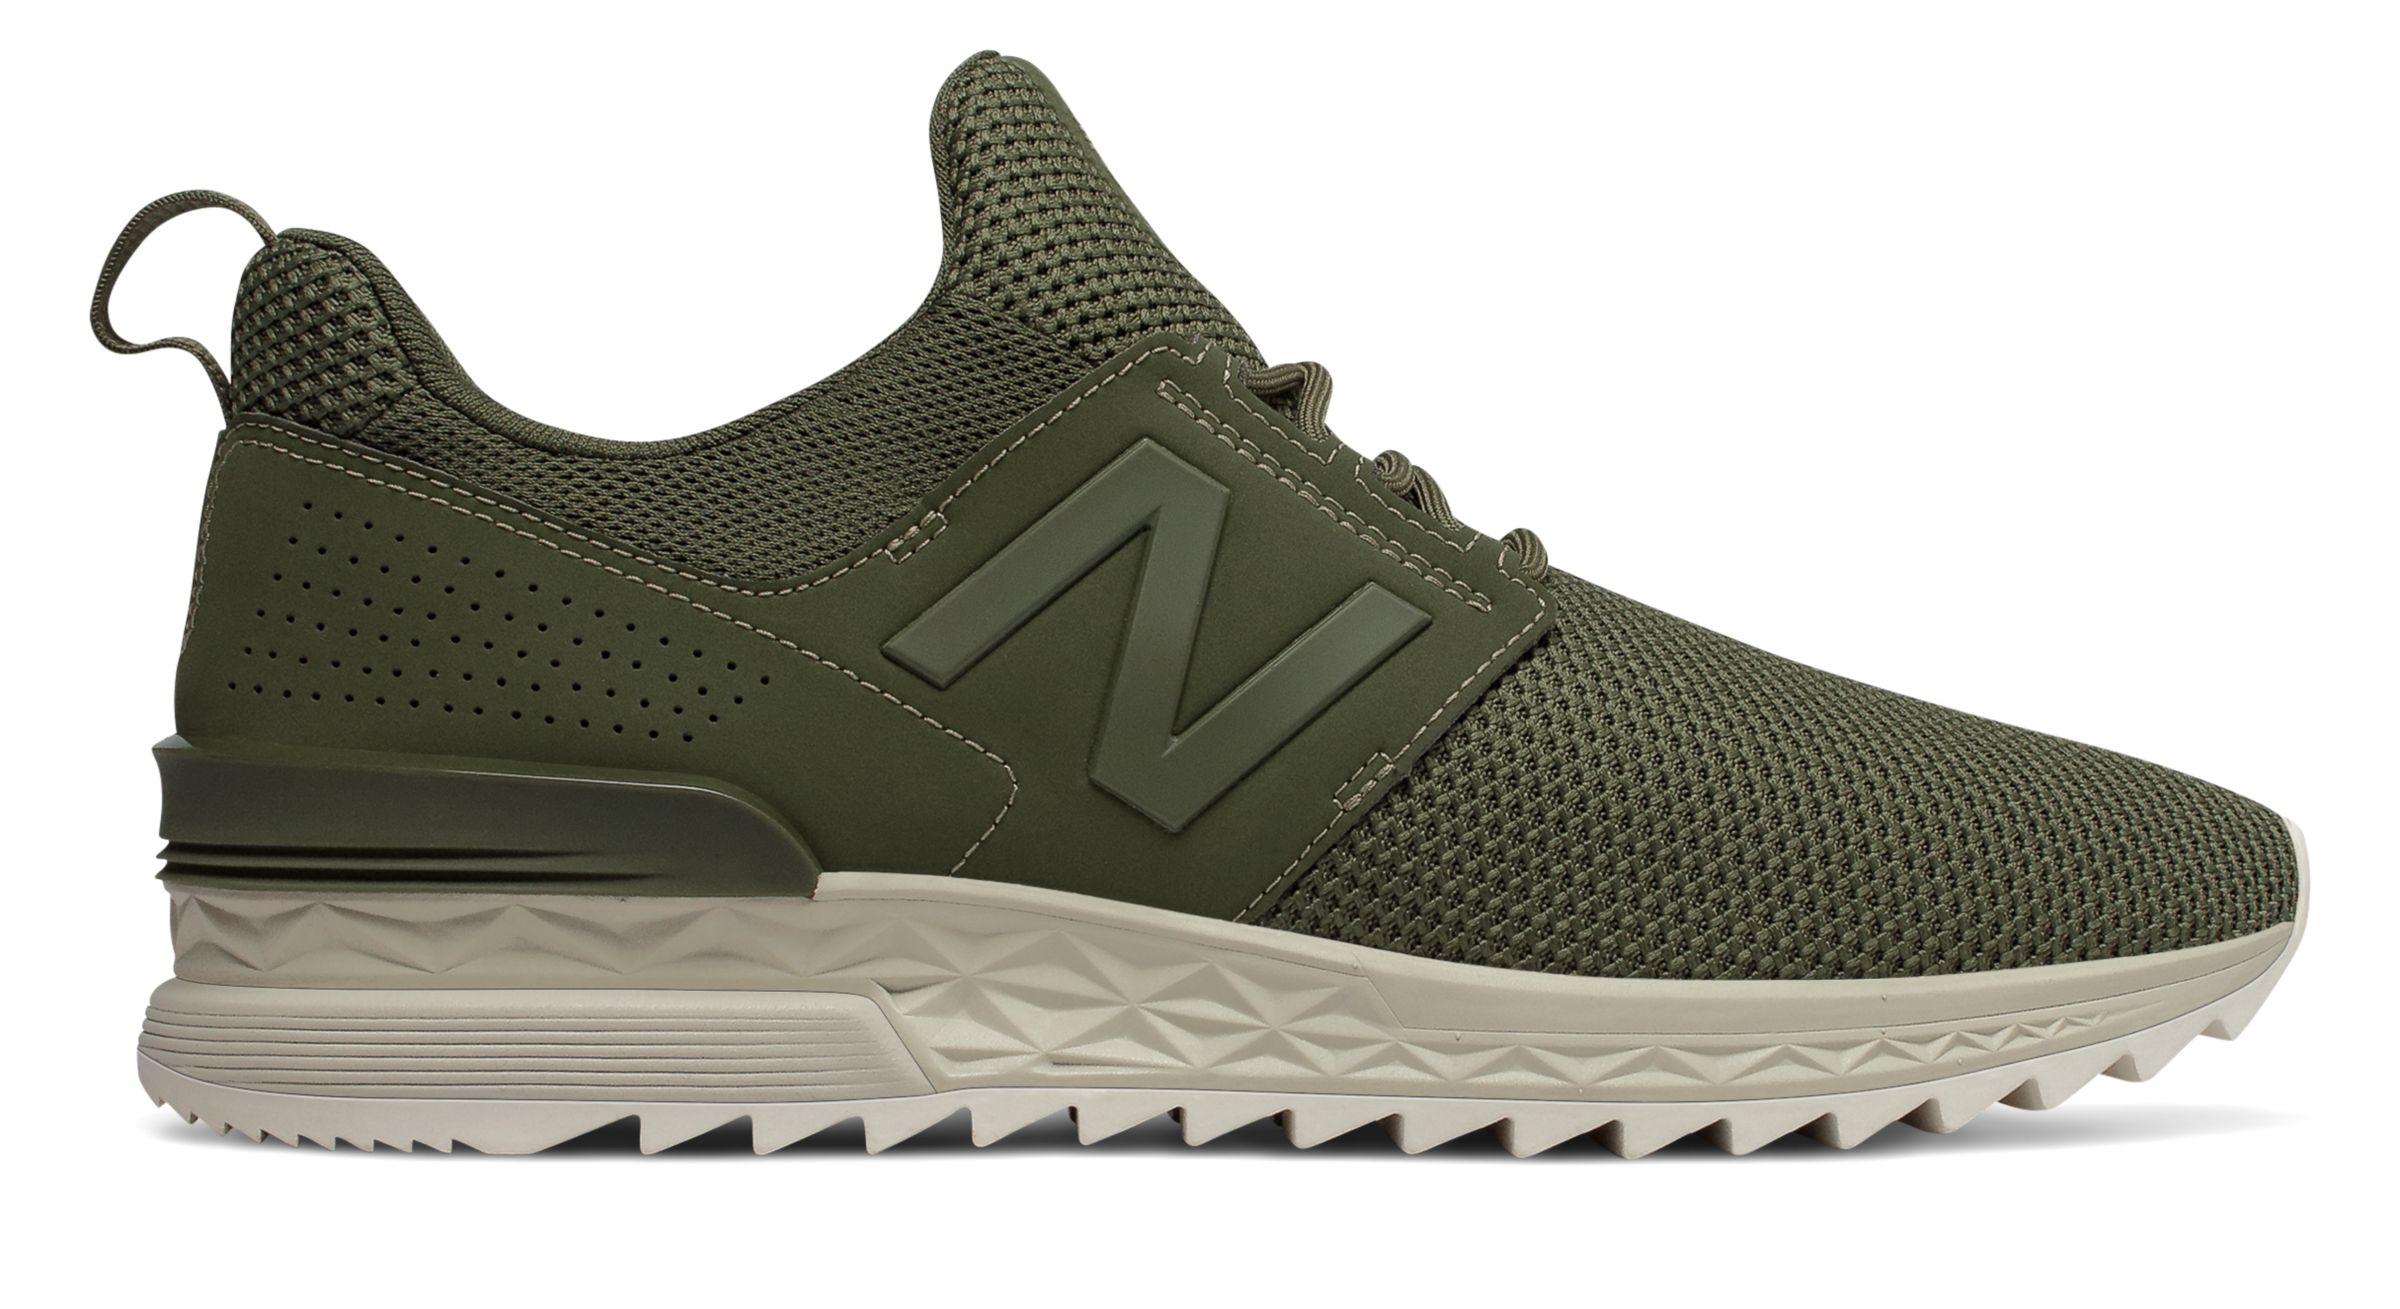 New Balance MS574-DU on Sale - Discounts Up to 57% Off on MS574DUO at Joe's  New Balance Outlet